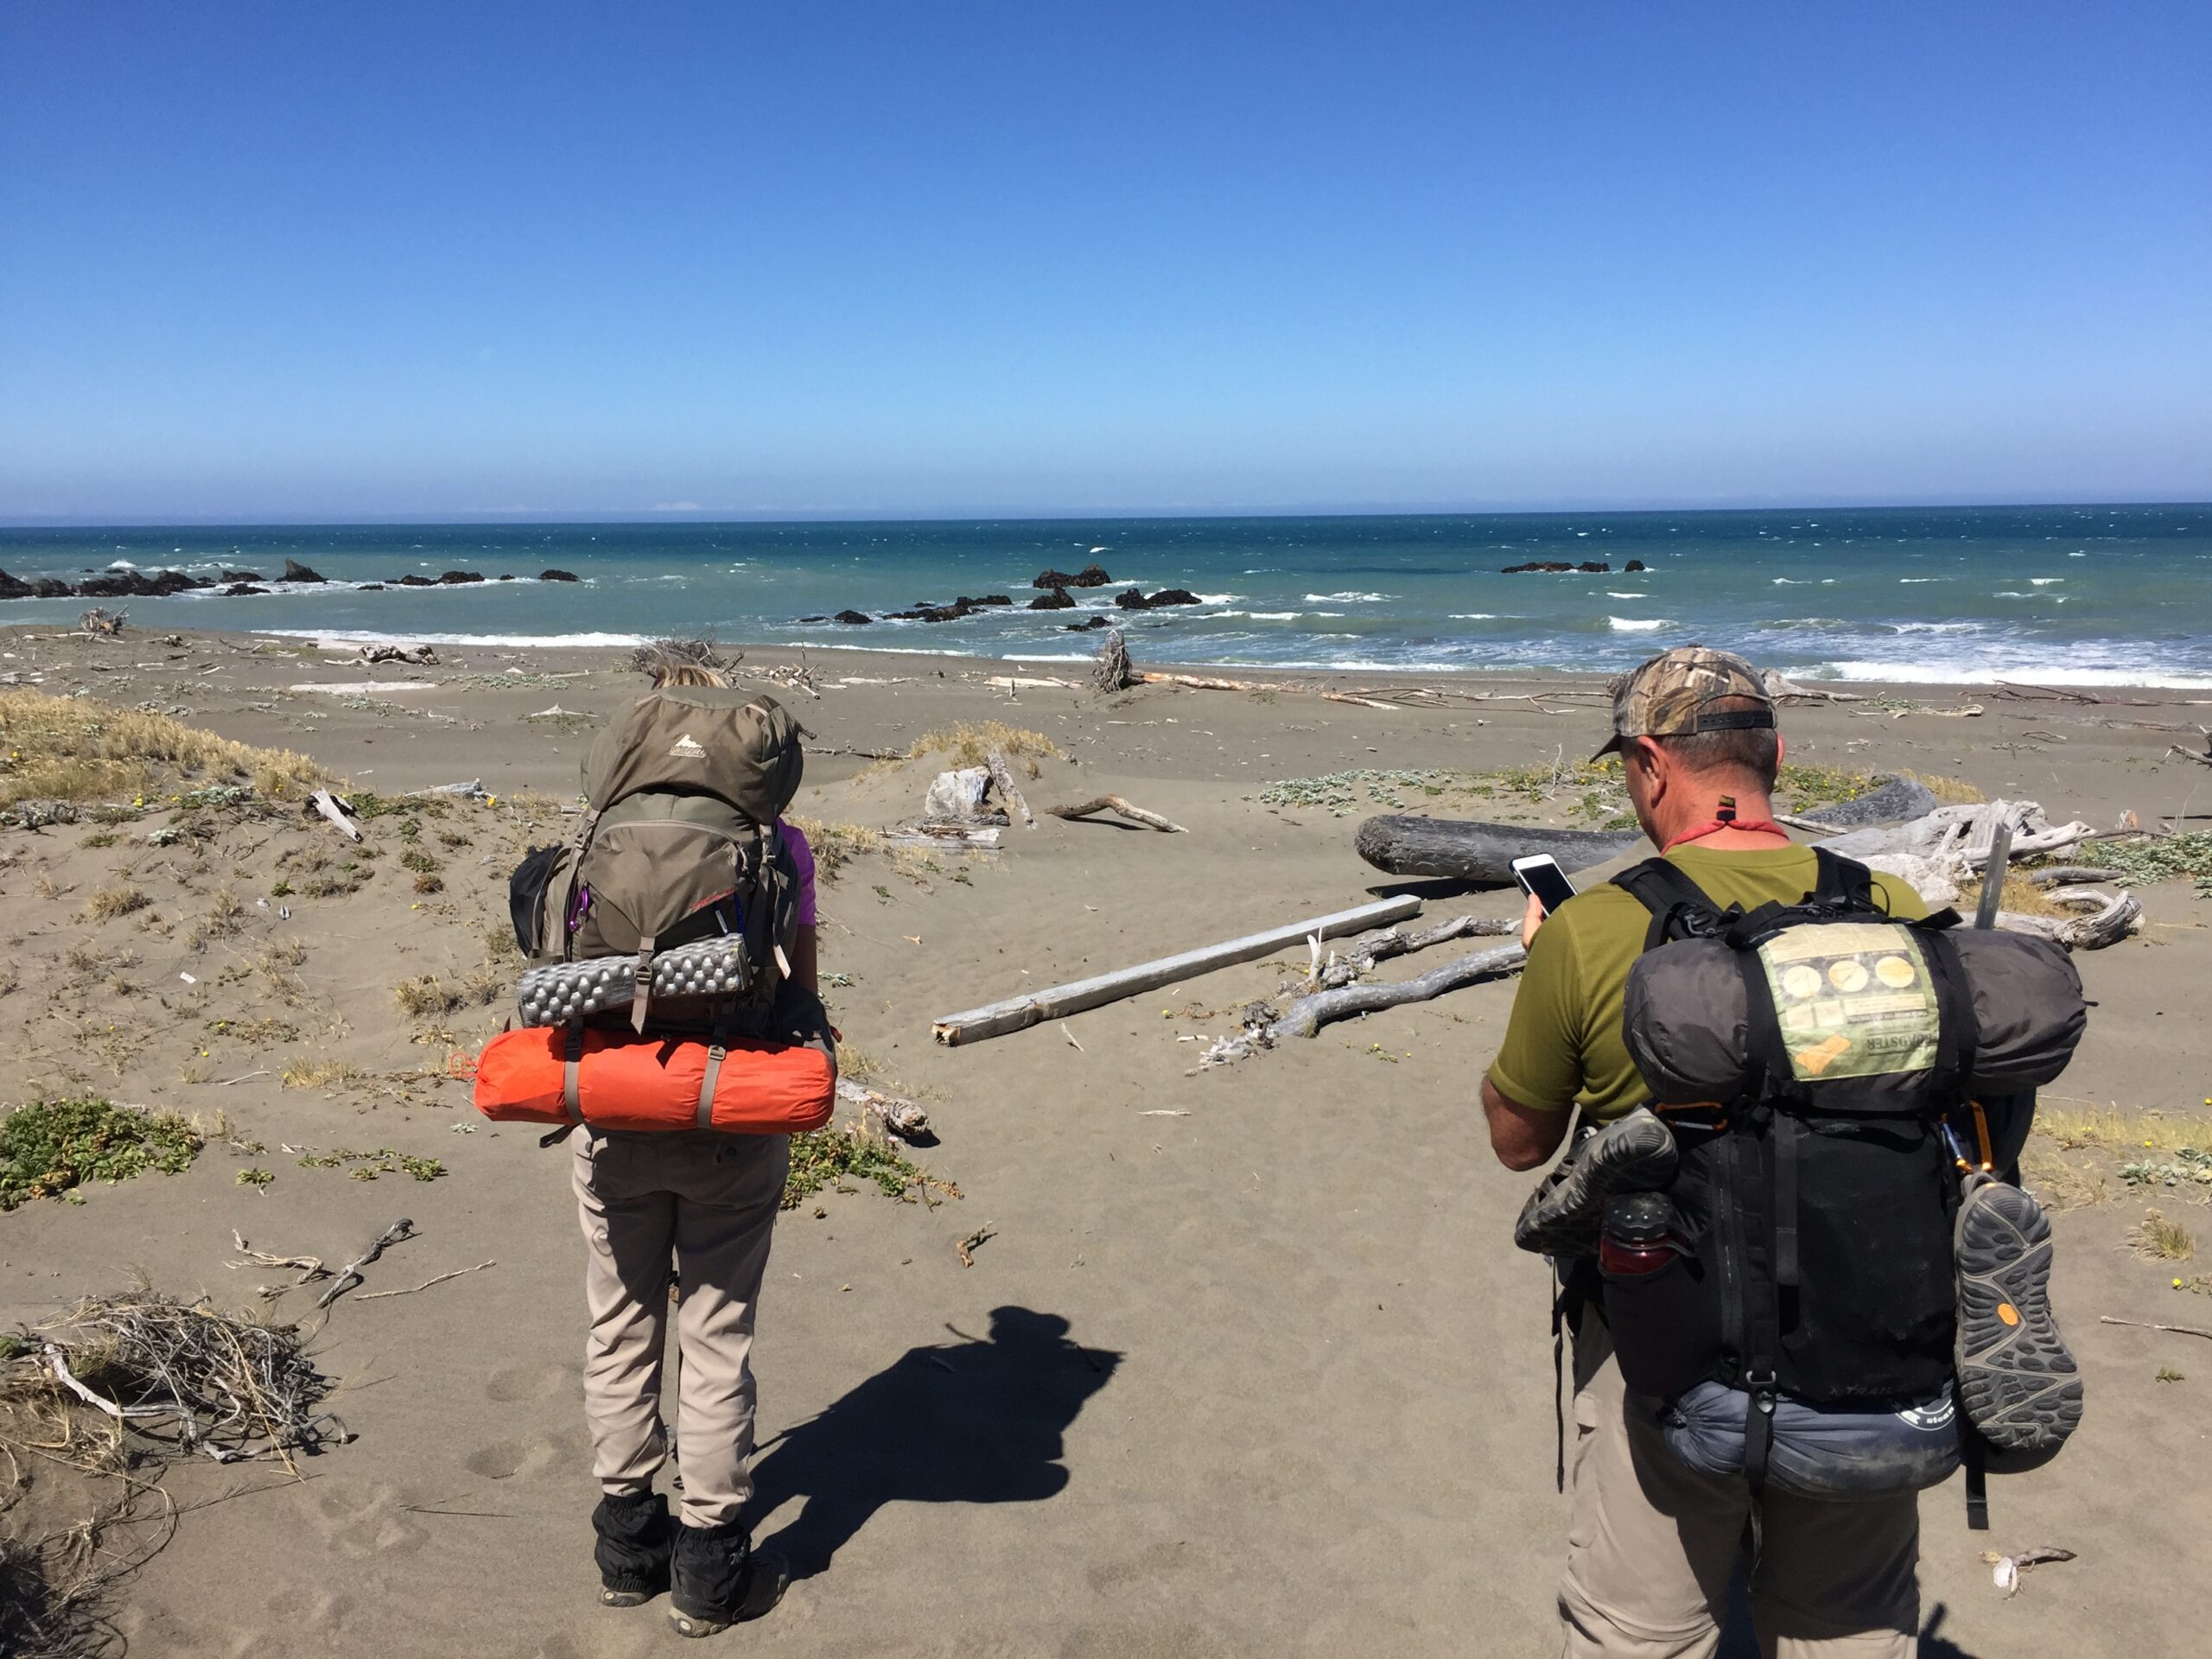 Backpacking along Mattole Beach on California's Lost Coast Trail